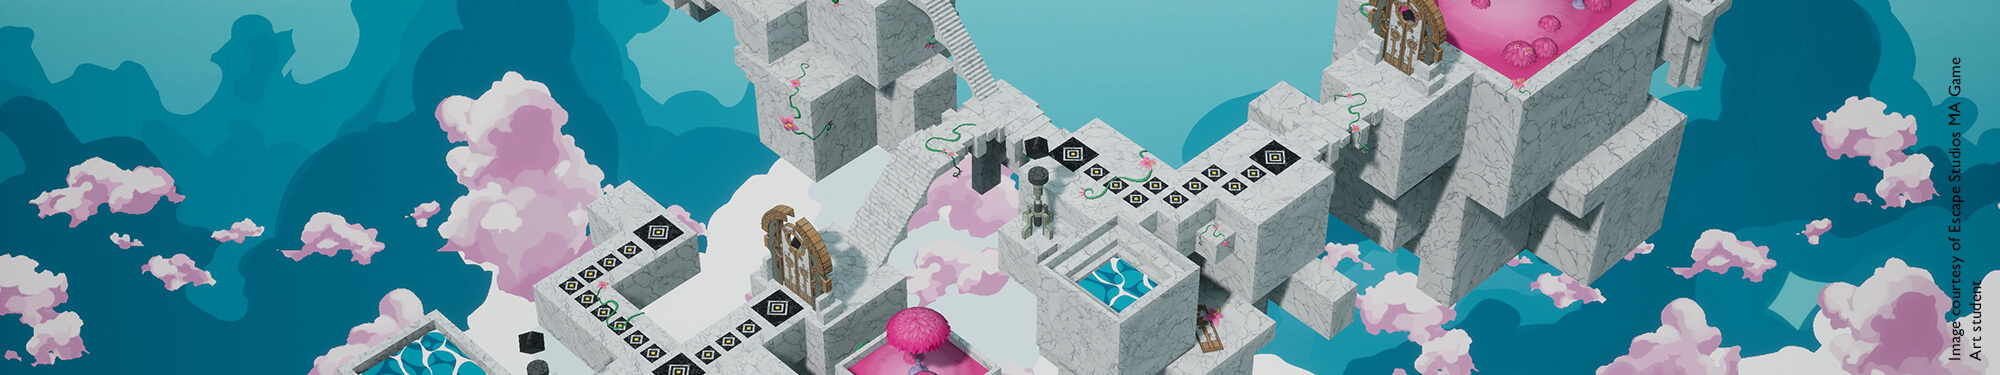 A castle game environment on a blue background with cherry blossoms